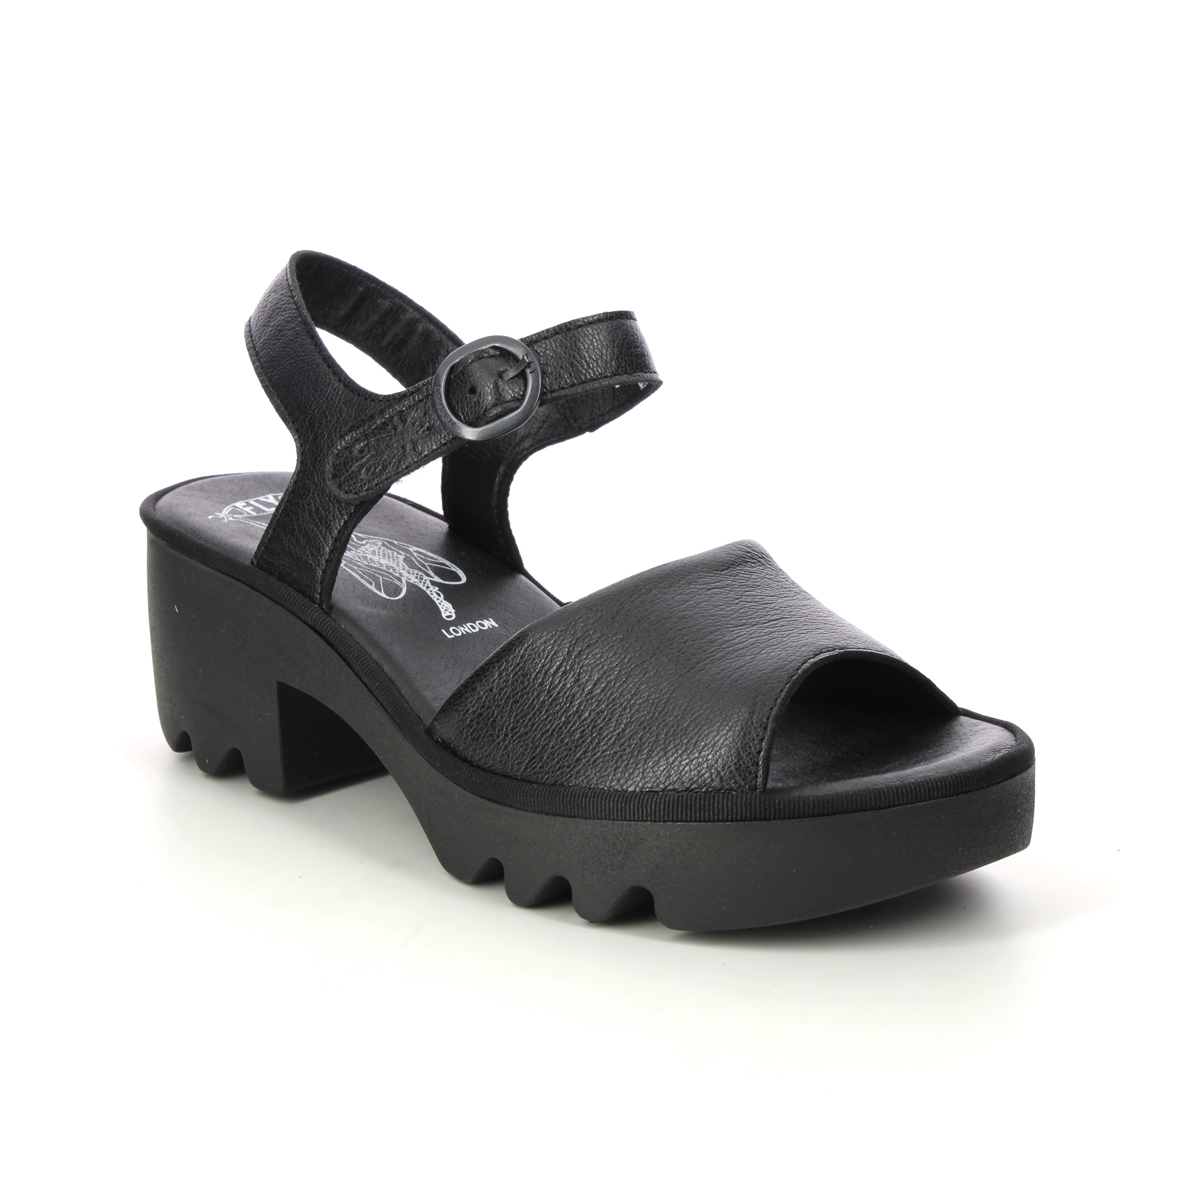 Fly London Tull Thalia Black leather Womens Wedge Sandals P501503-000 in a Plain Leather and Textile in Size 41